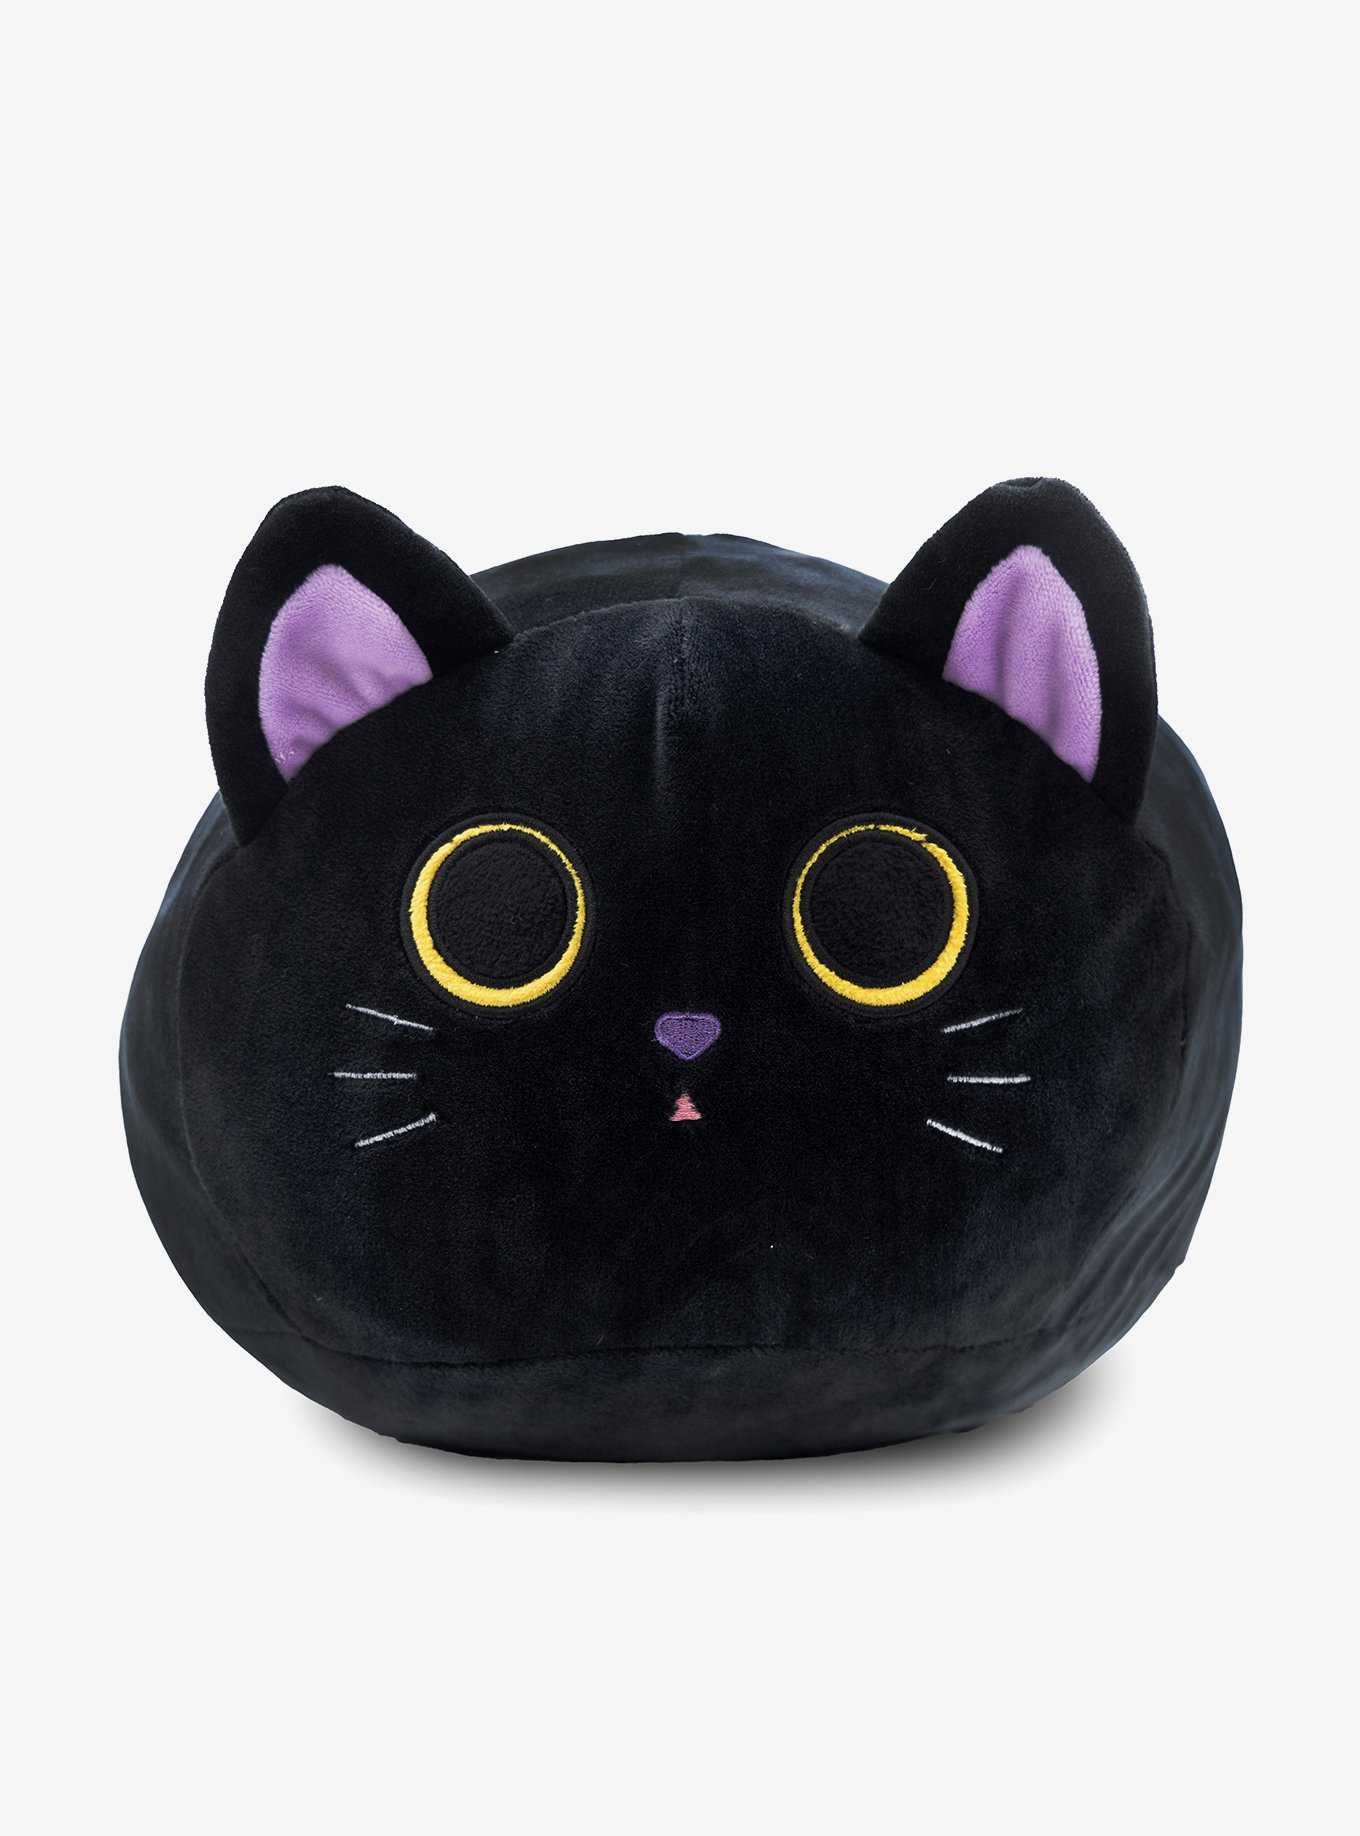 Plushible 2-in-1 Cosmo the Black Cat Snugible, , hi-res